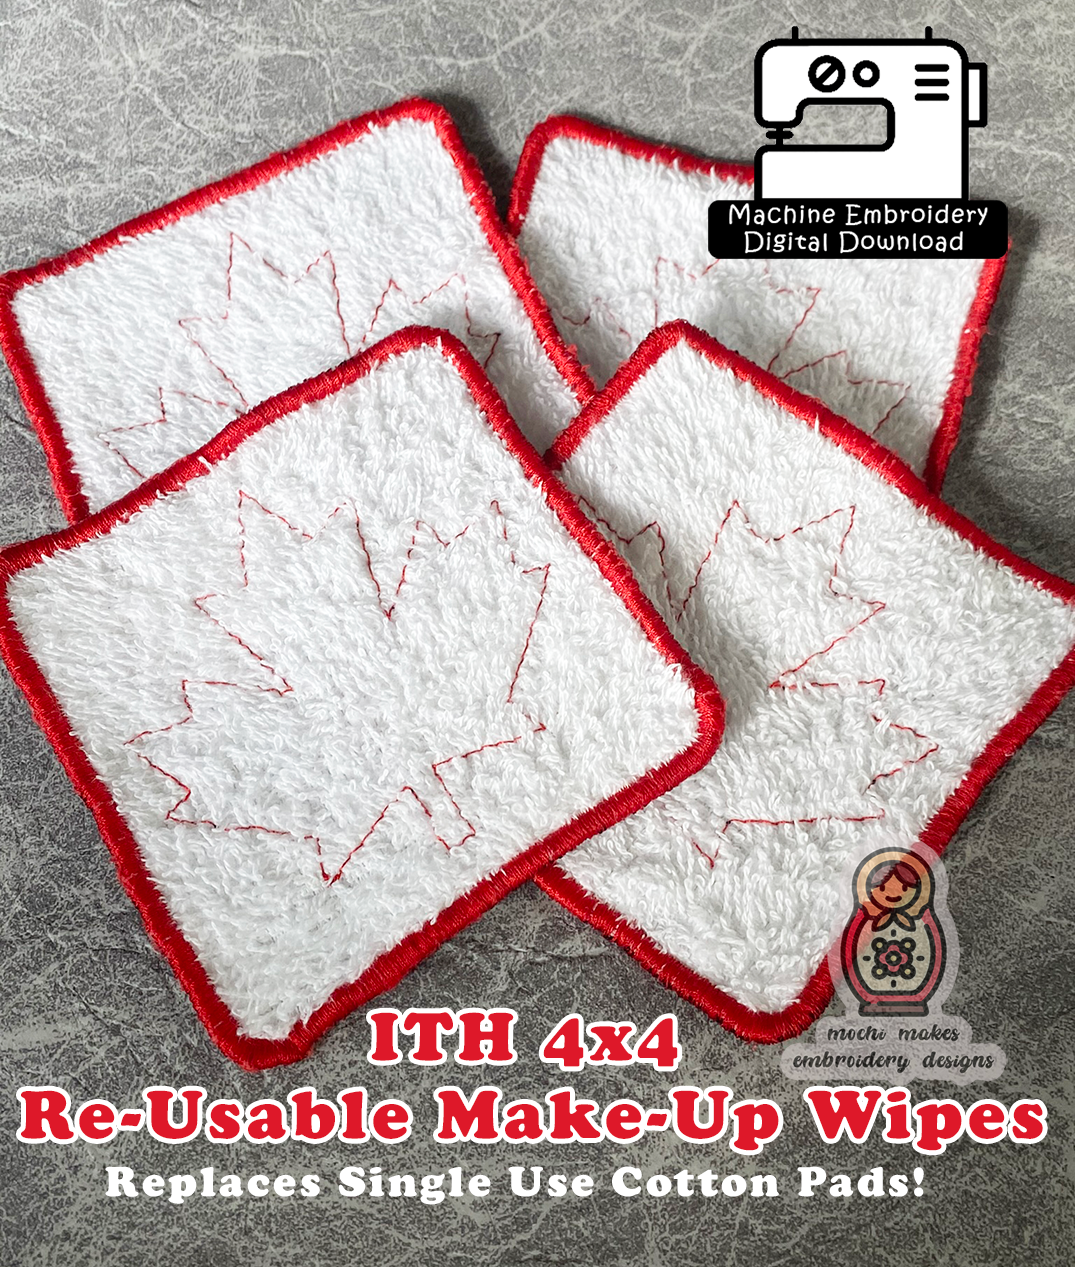 Maple Leaf Canada Canadian Re-Usable Make-up Wipes Cotton Pad ITH Machine Embroidery DIY Digital Design Download File 4x4 Terry Cloth